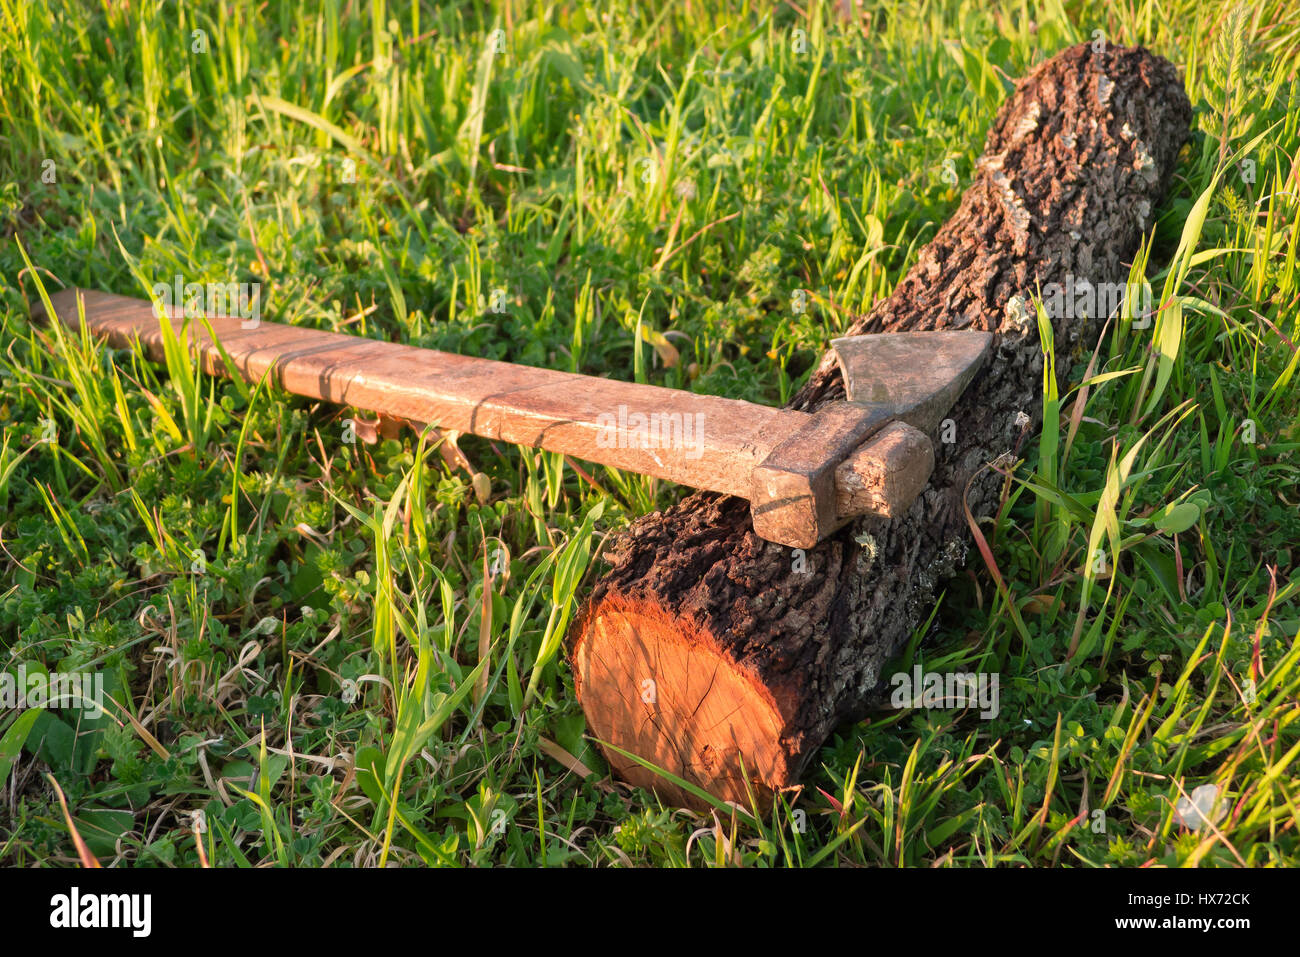 Ax and piece of almond wood. Stock Photo